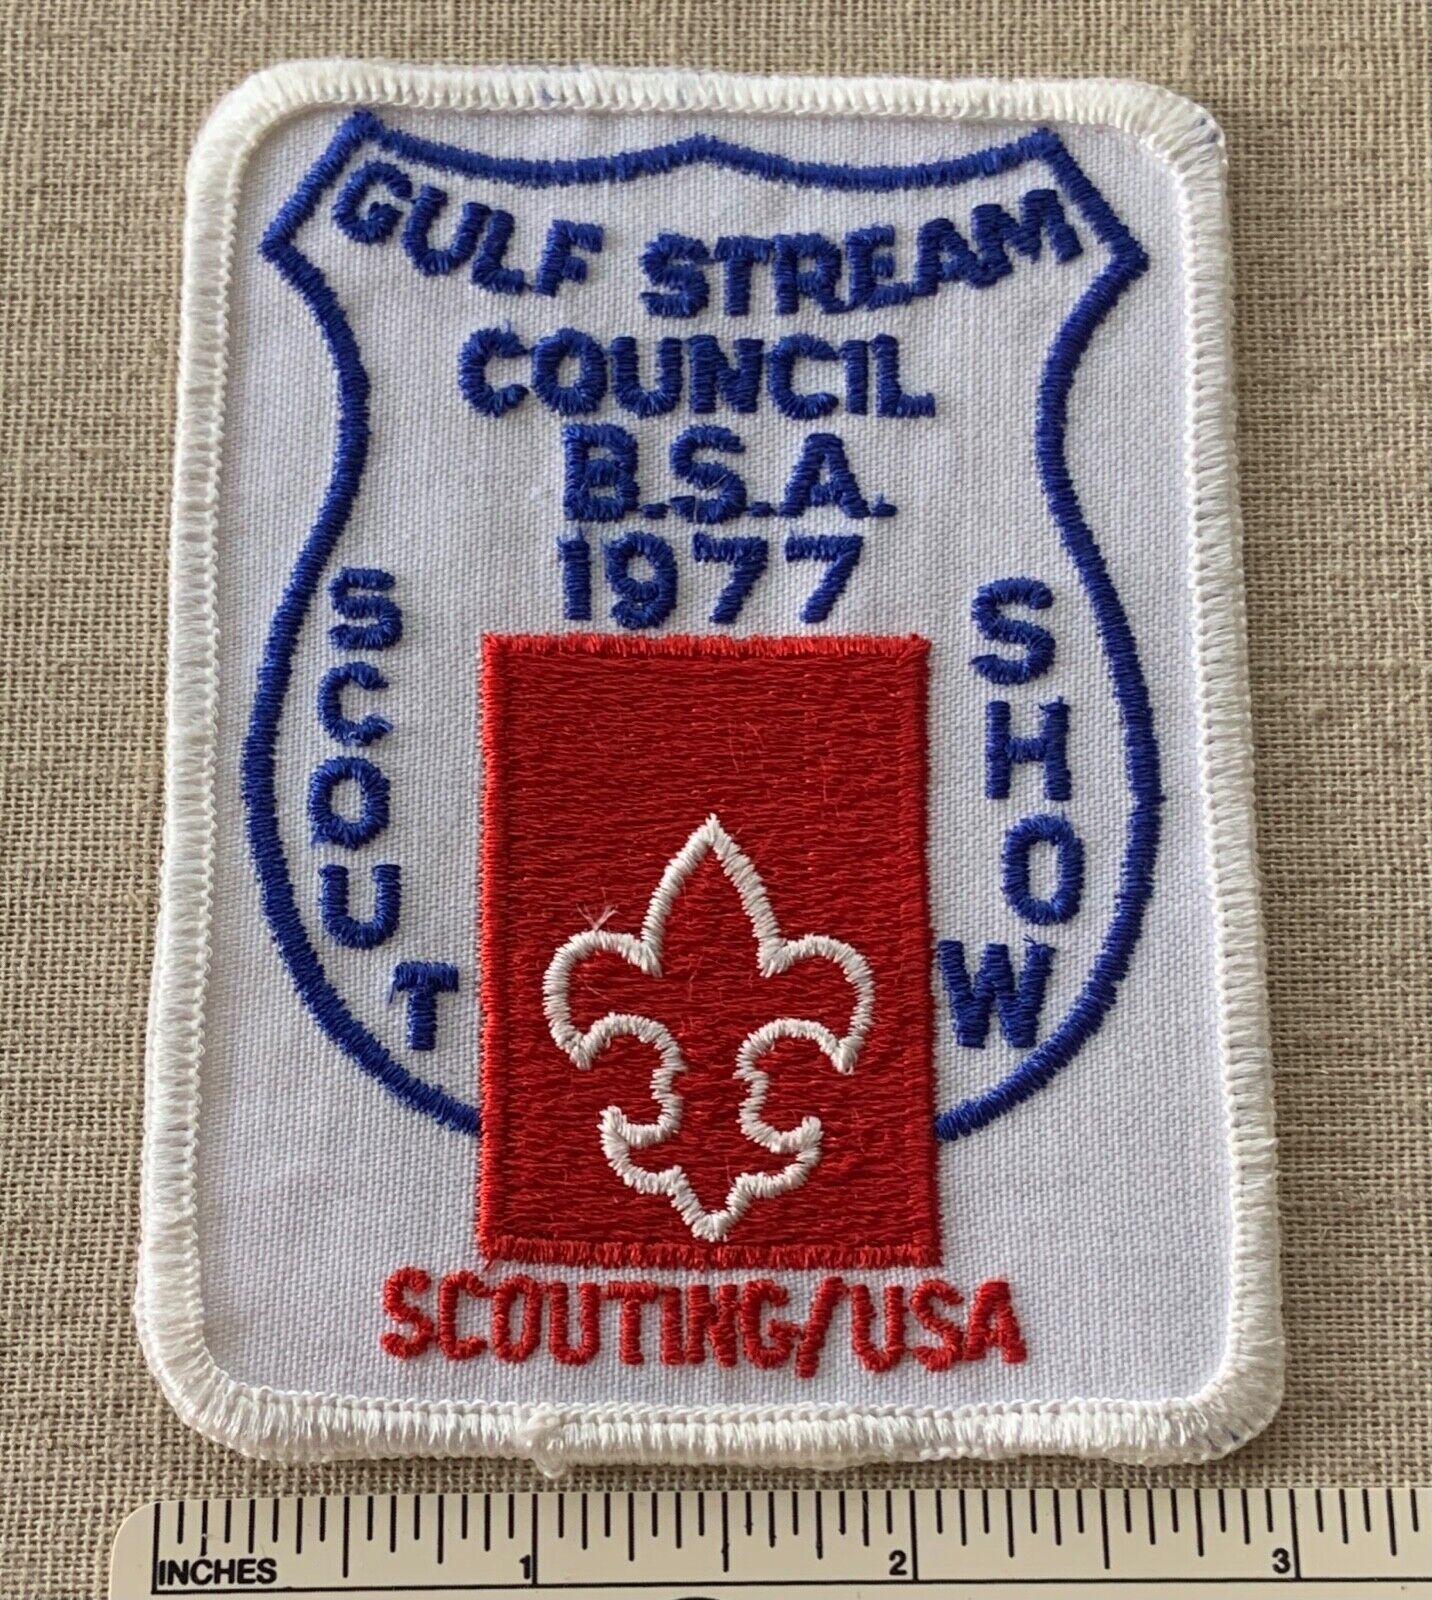 Vintage 1977 GULF STREAM COUNCIL Boy Scout Show PATCH Scouting USA Camp Badge